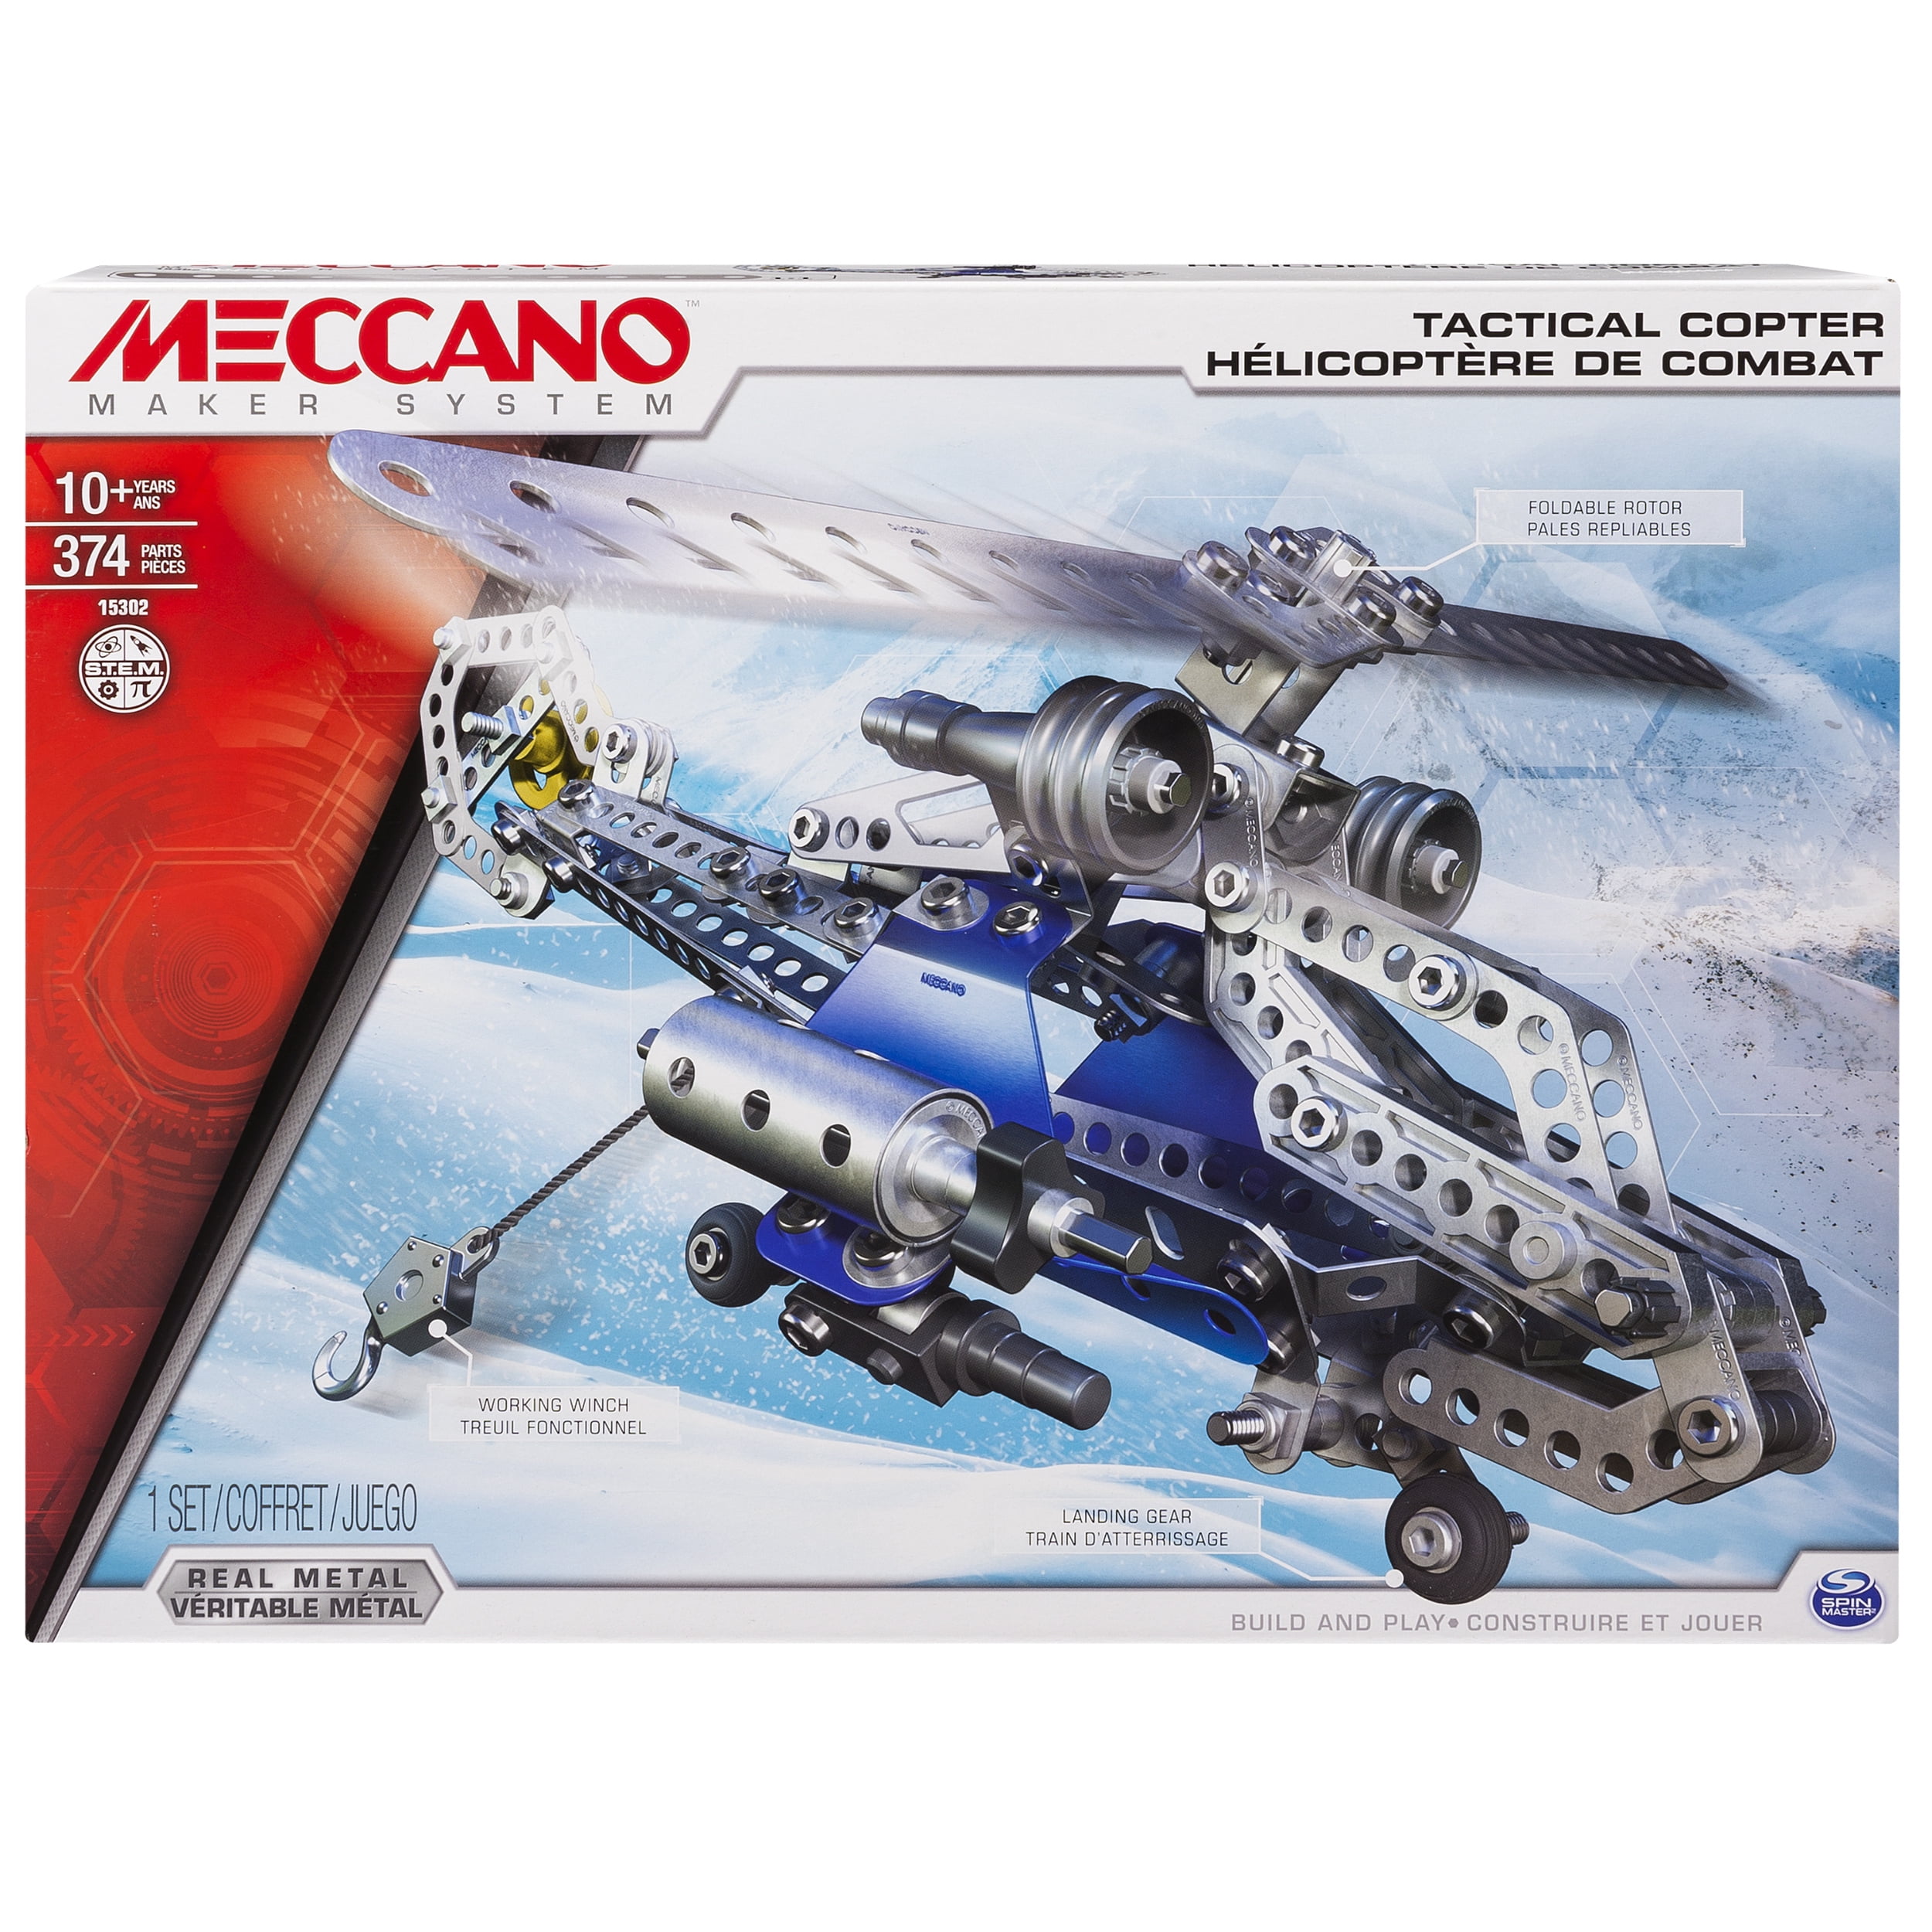 Meccano ATV Chopper Drone vehicle Dispaly Birthday Party Game toy Gift Set 